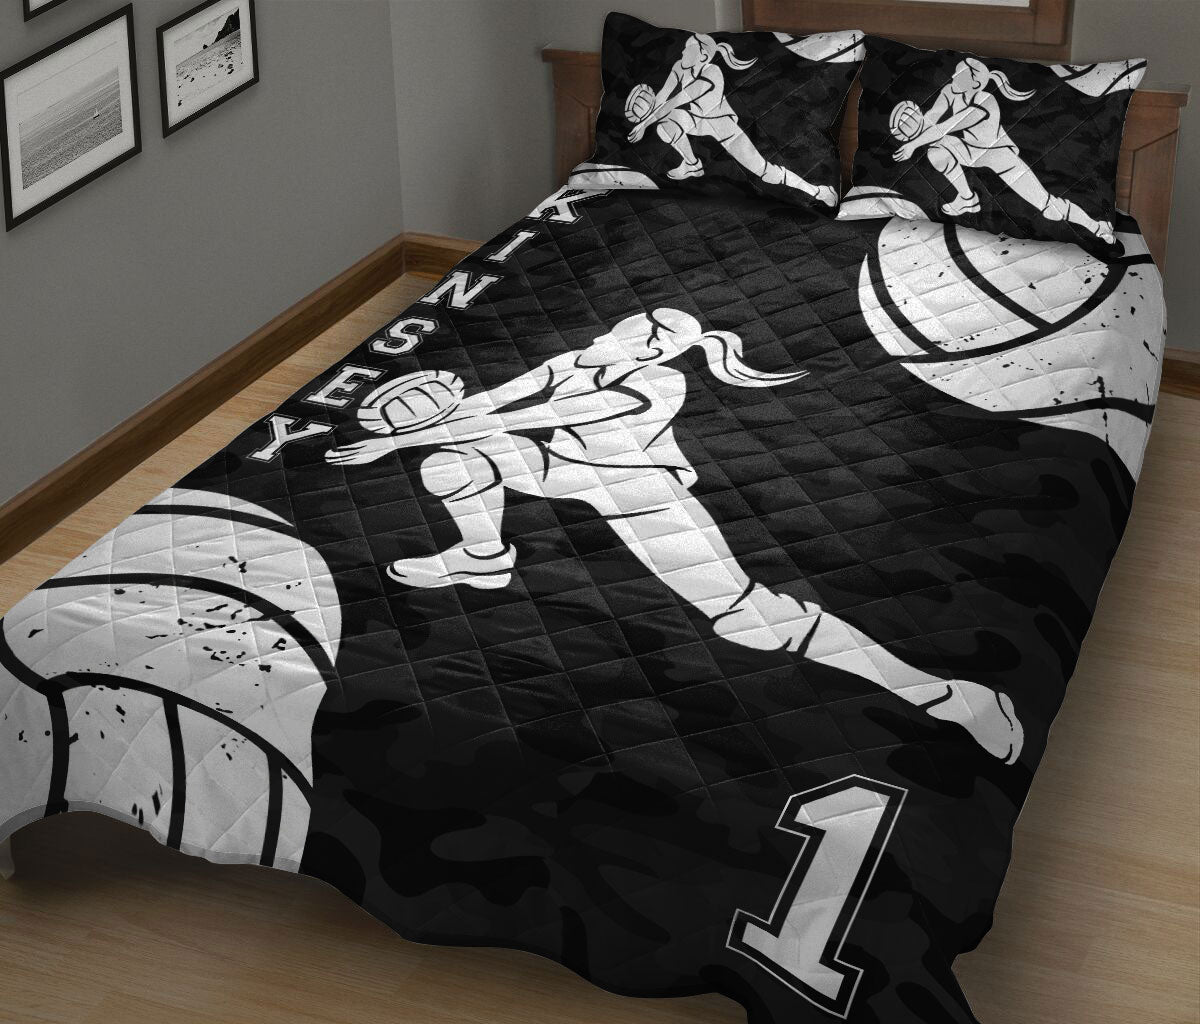 Ohaprints-Quilt-Bed-Set-Pillowcase-Volleyball-Libero-Girl-Black-Camo-Pattern-Fan-Gift-Custom-Personalized-Name-Blanket-Bedspread-Bedding-60-King (90'' x 100'')